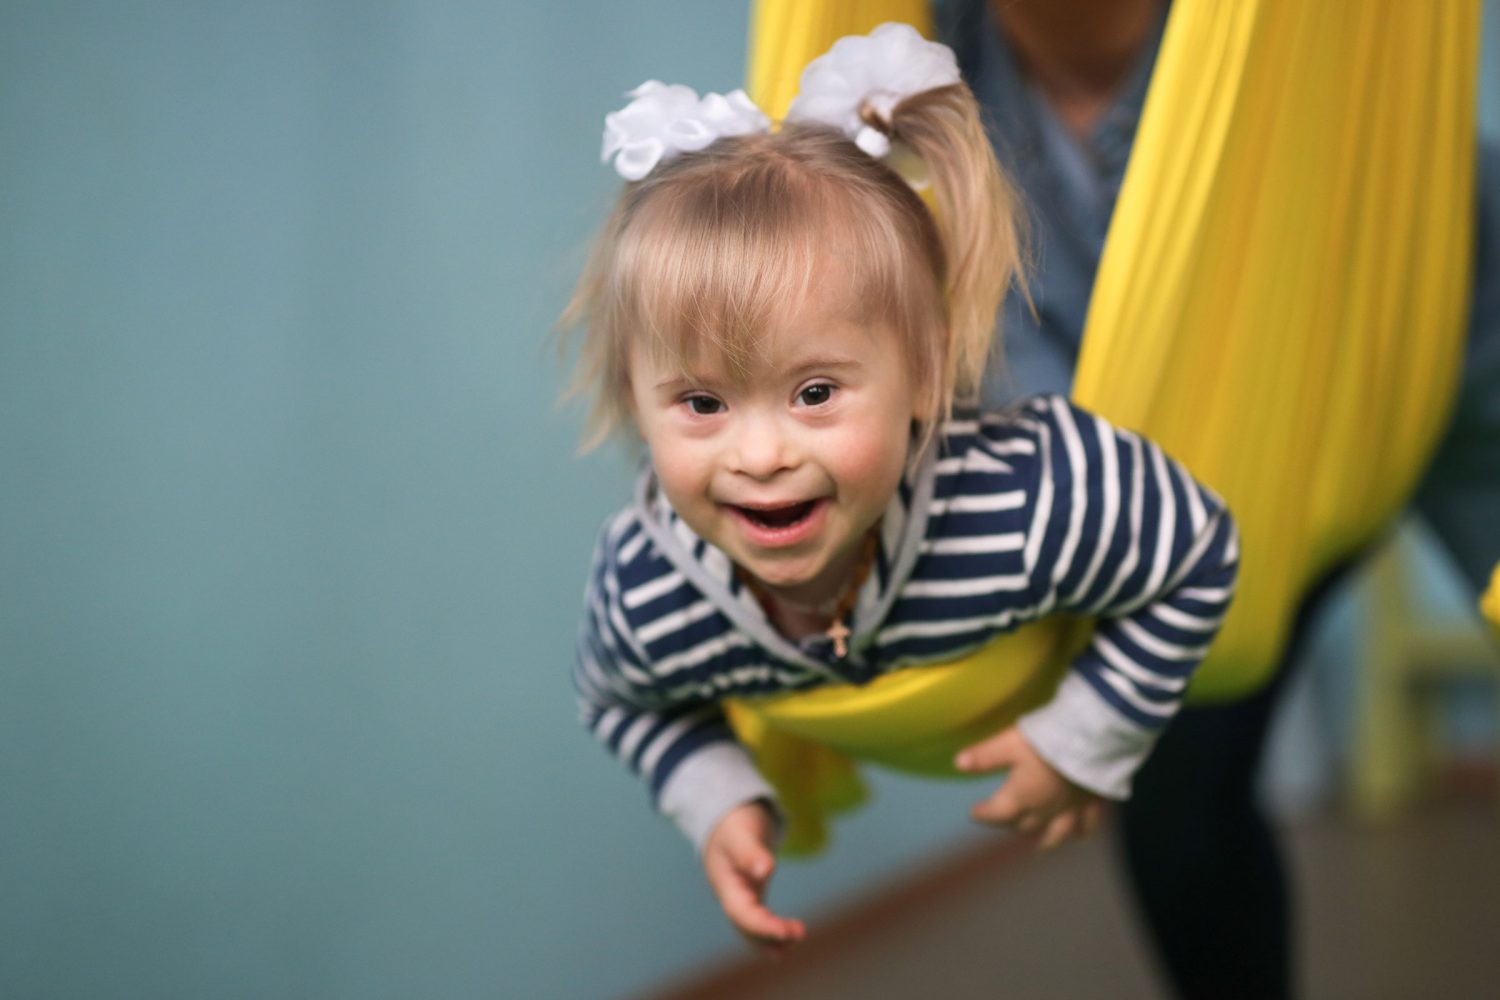 Girl with Down syndrome swings in hammock